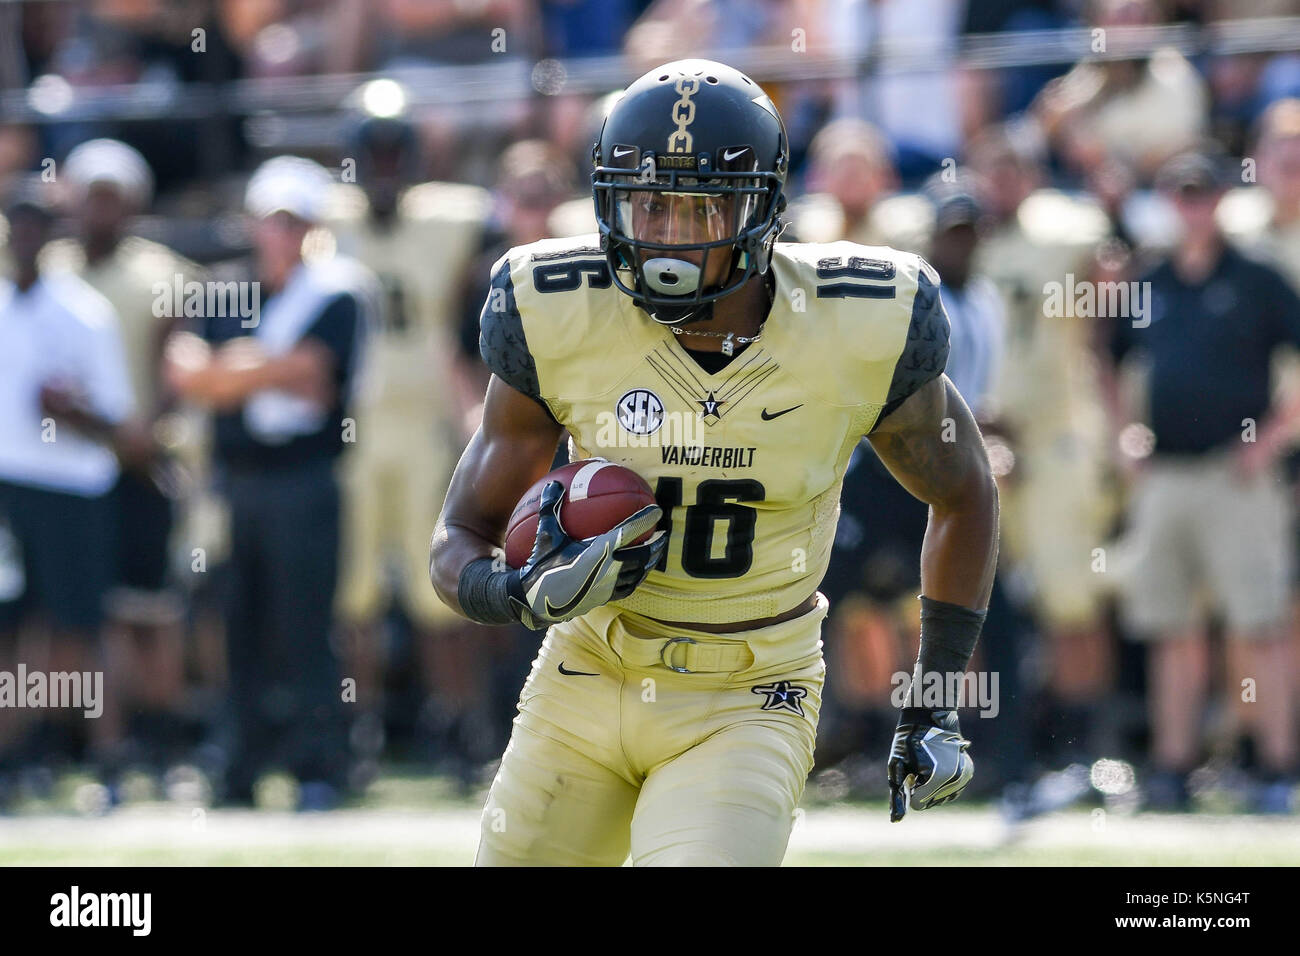 Nashville, TN, USA. 2nd Sep, 2017. Vanderbilt Commodores wide receiver Kalija Lipscomb (16) running with the ball during a game between the Alabama A&M Bulldogs and the Vanderbilt Commodores at Vanderbilt Stadium in Nashville, TN. Thomas McEwen/CSM/Alamy Live News Stock Photo